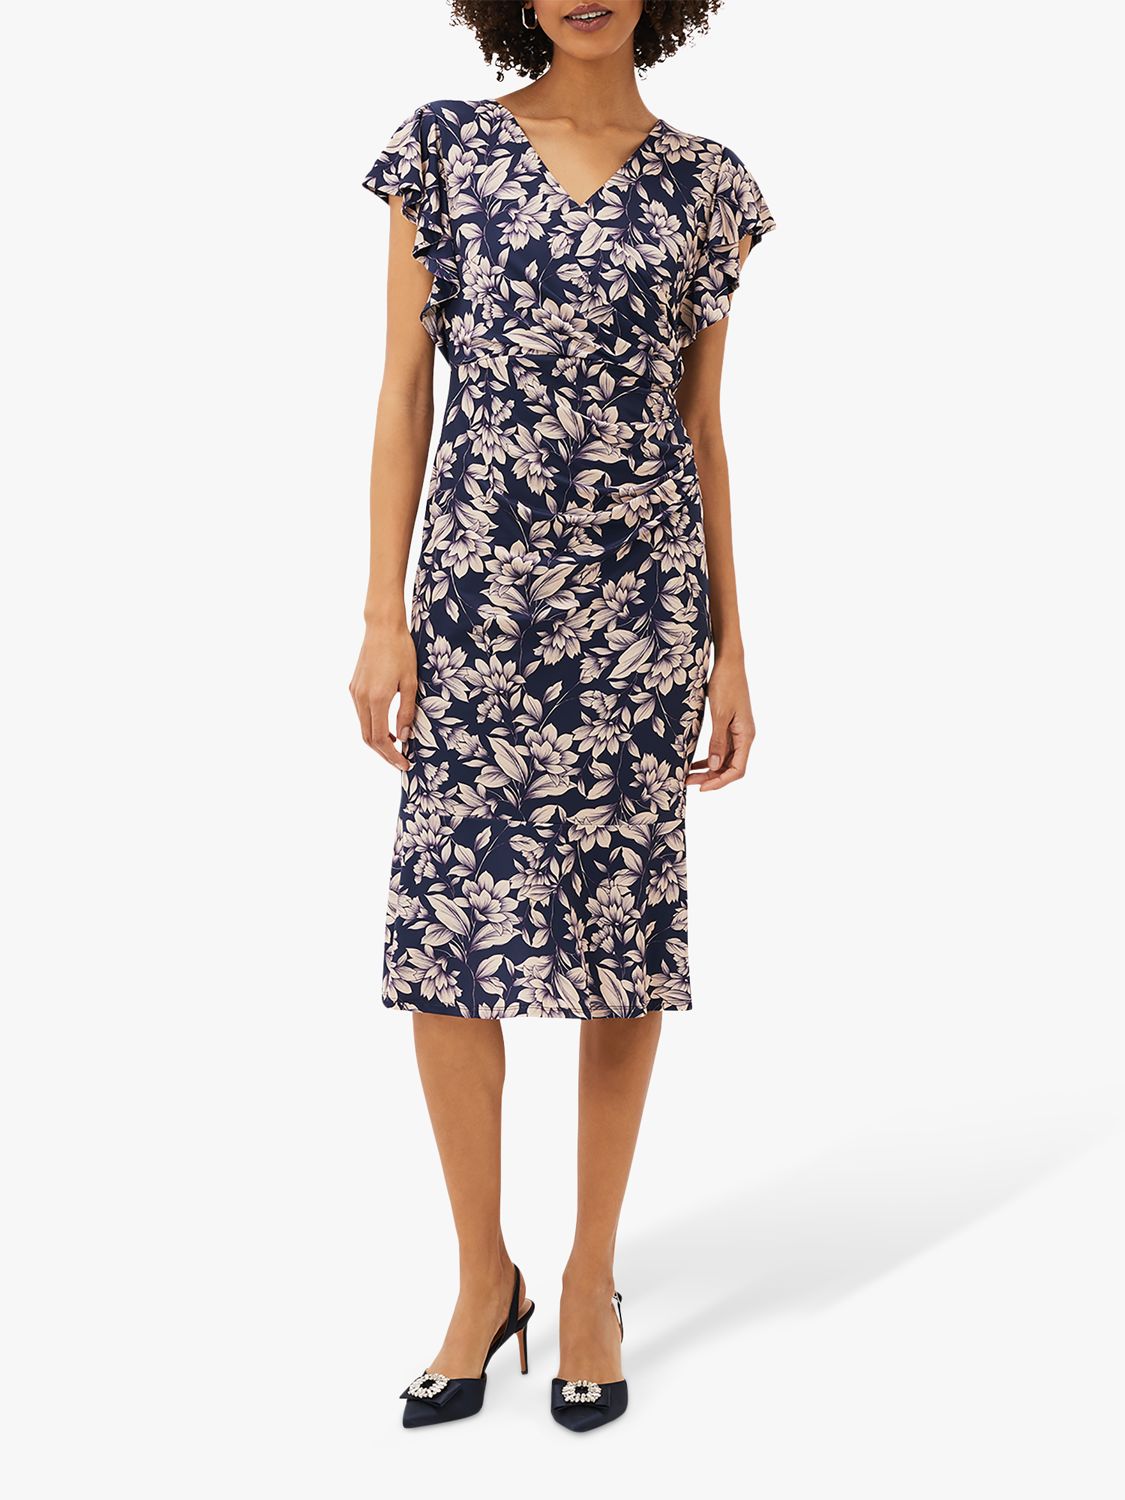 Phase Eight Zedy Floral Jersey Dress, Perussian Blue/Cameo, 6